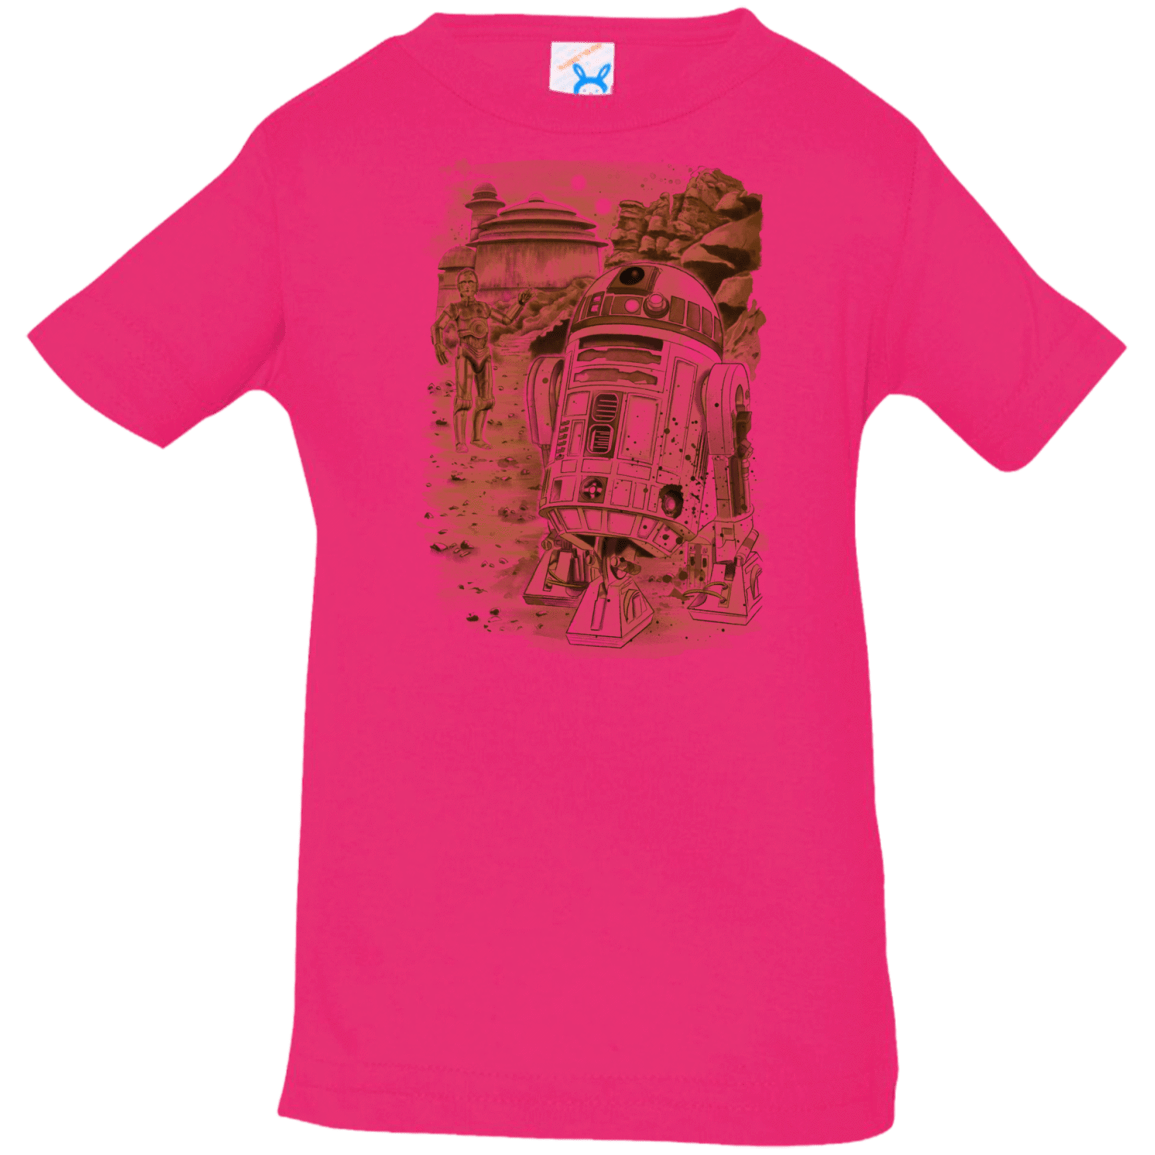 T-Shirts Hot Pink / 6 Months Mission to jabba palace Infant Premium T-Shirt